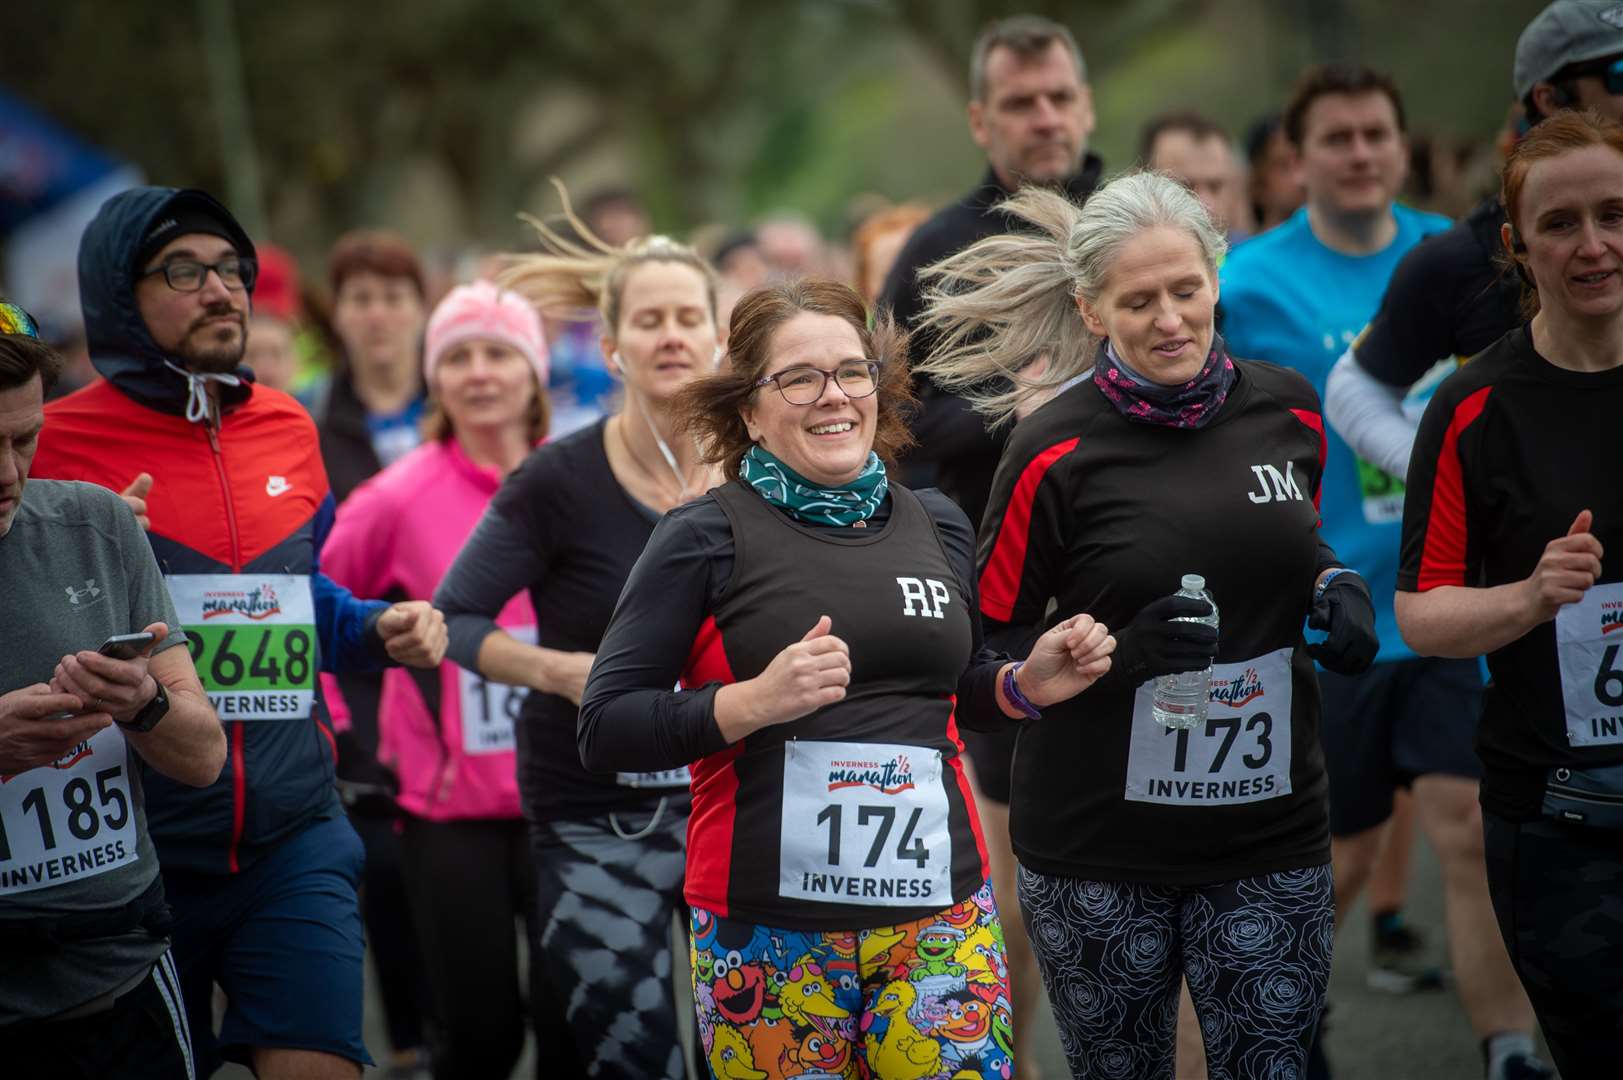 The Inverness Half Marathon is the perfect spring race to keep entrants motivated and training.